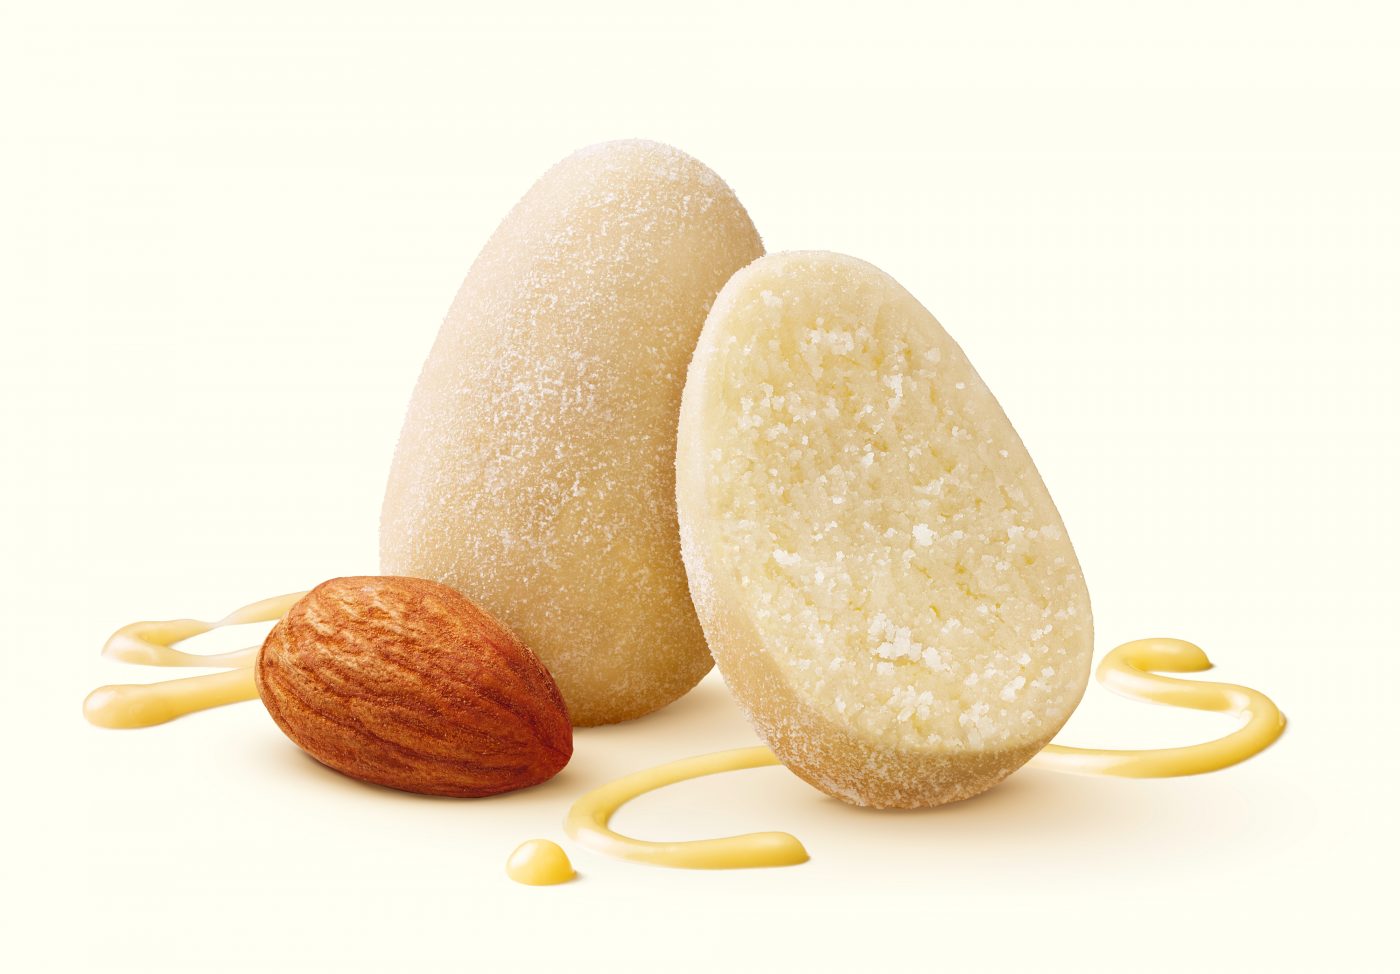 you can see a marzipan egg divided in the middle. Outside you can see an almond and liquid white chocolate strips for the packaging photography